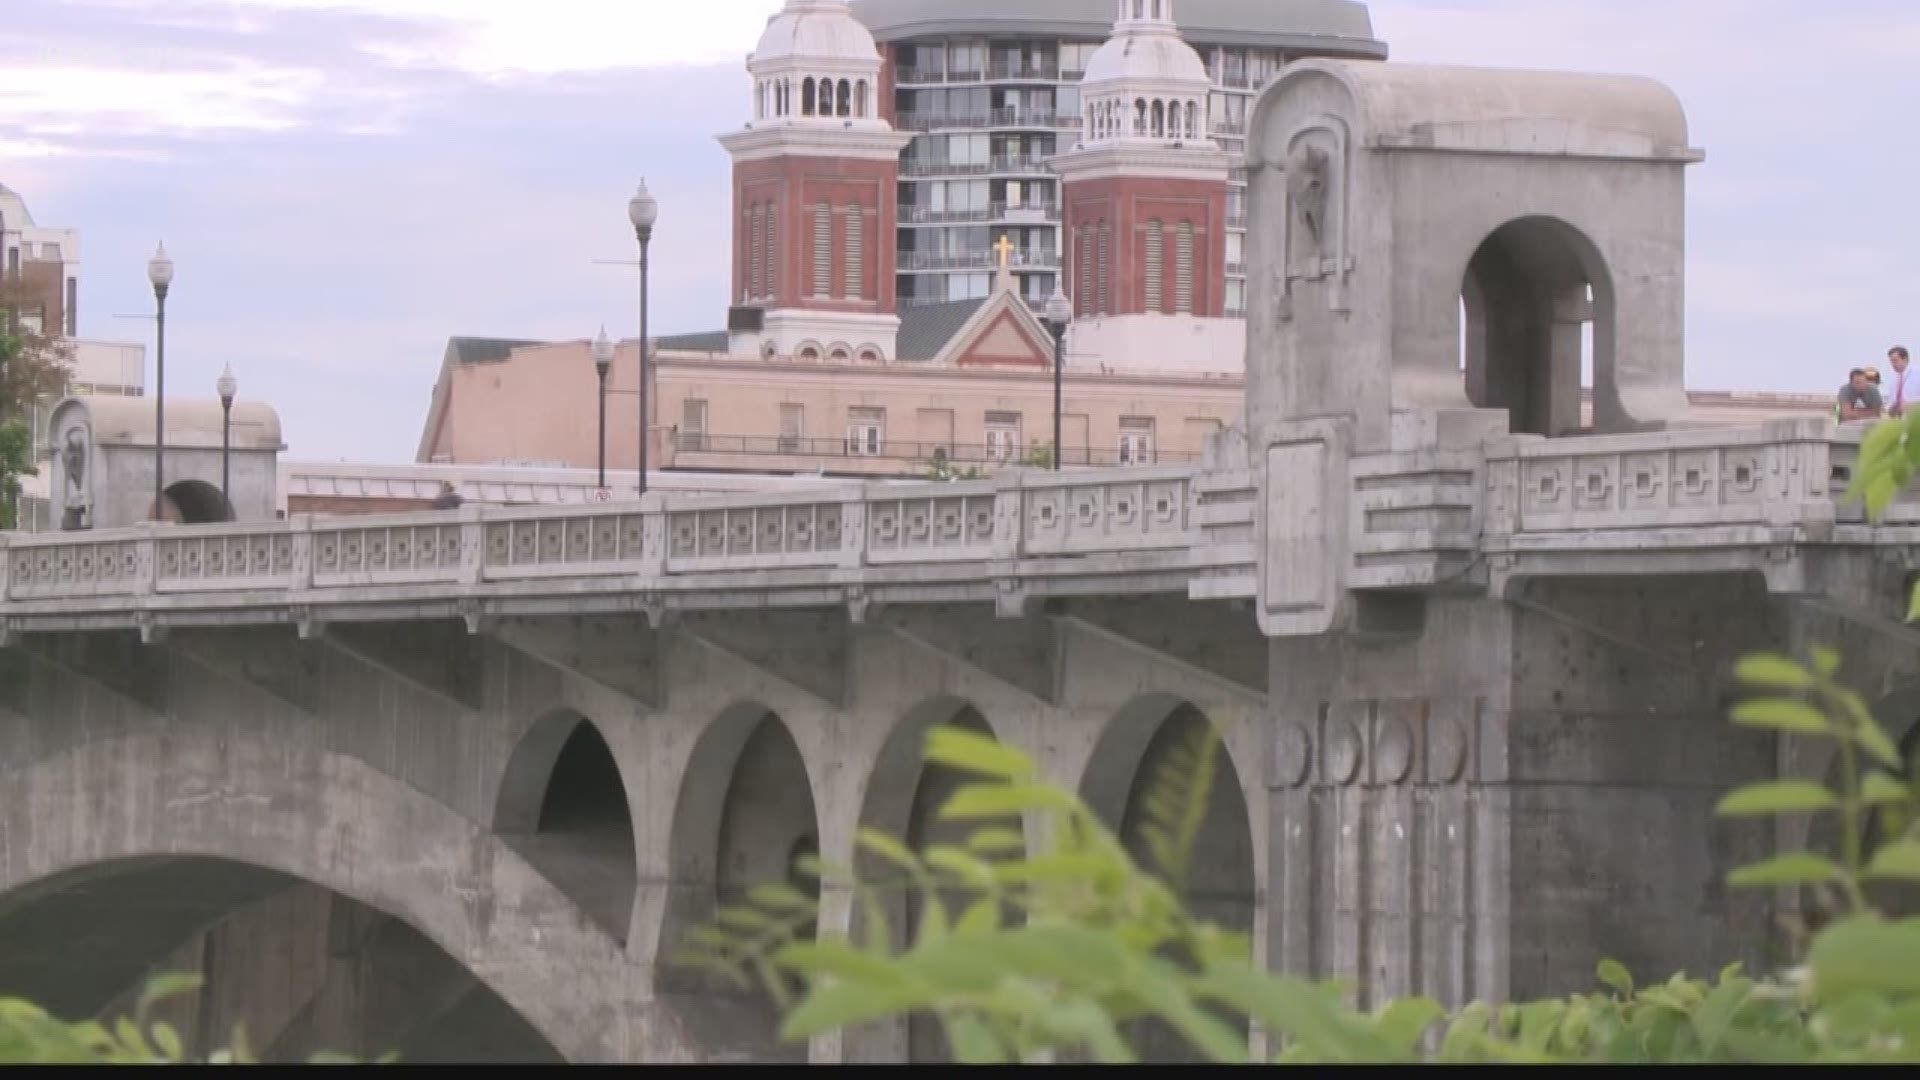 The City of Spokane disbanded their Monroe St. Bridge Suicide Task Force last spring. The city plans to add safety barriers to the bridge.